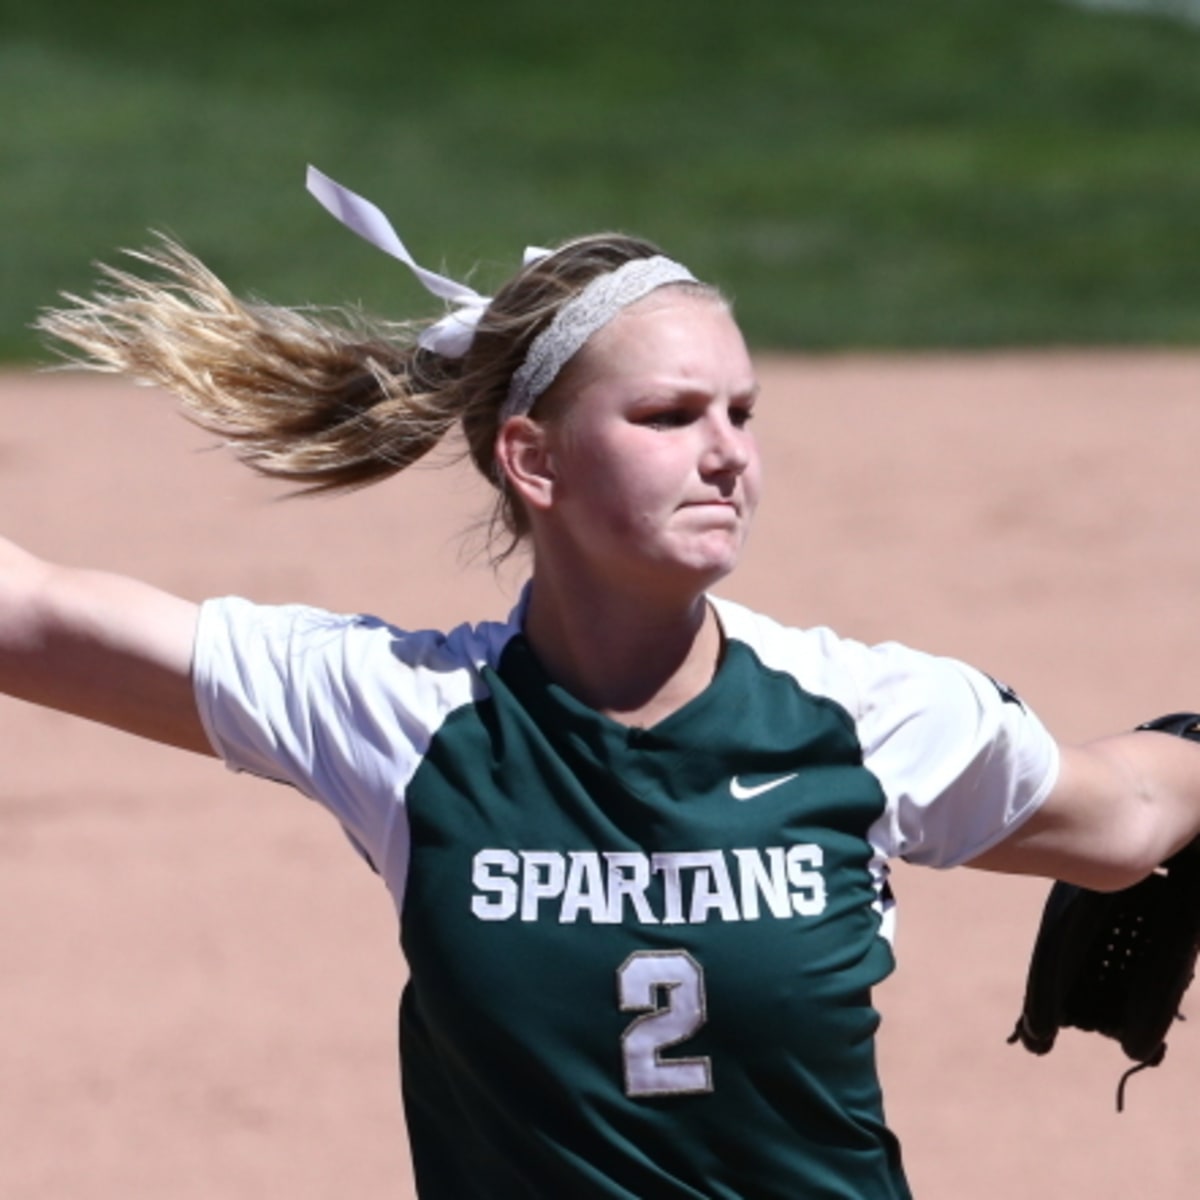 Msu Softball Spartan Bats Down Memphis 9 1 5 Sports Illustrated Michigan State Spartans News Analysis And More